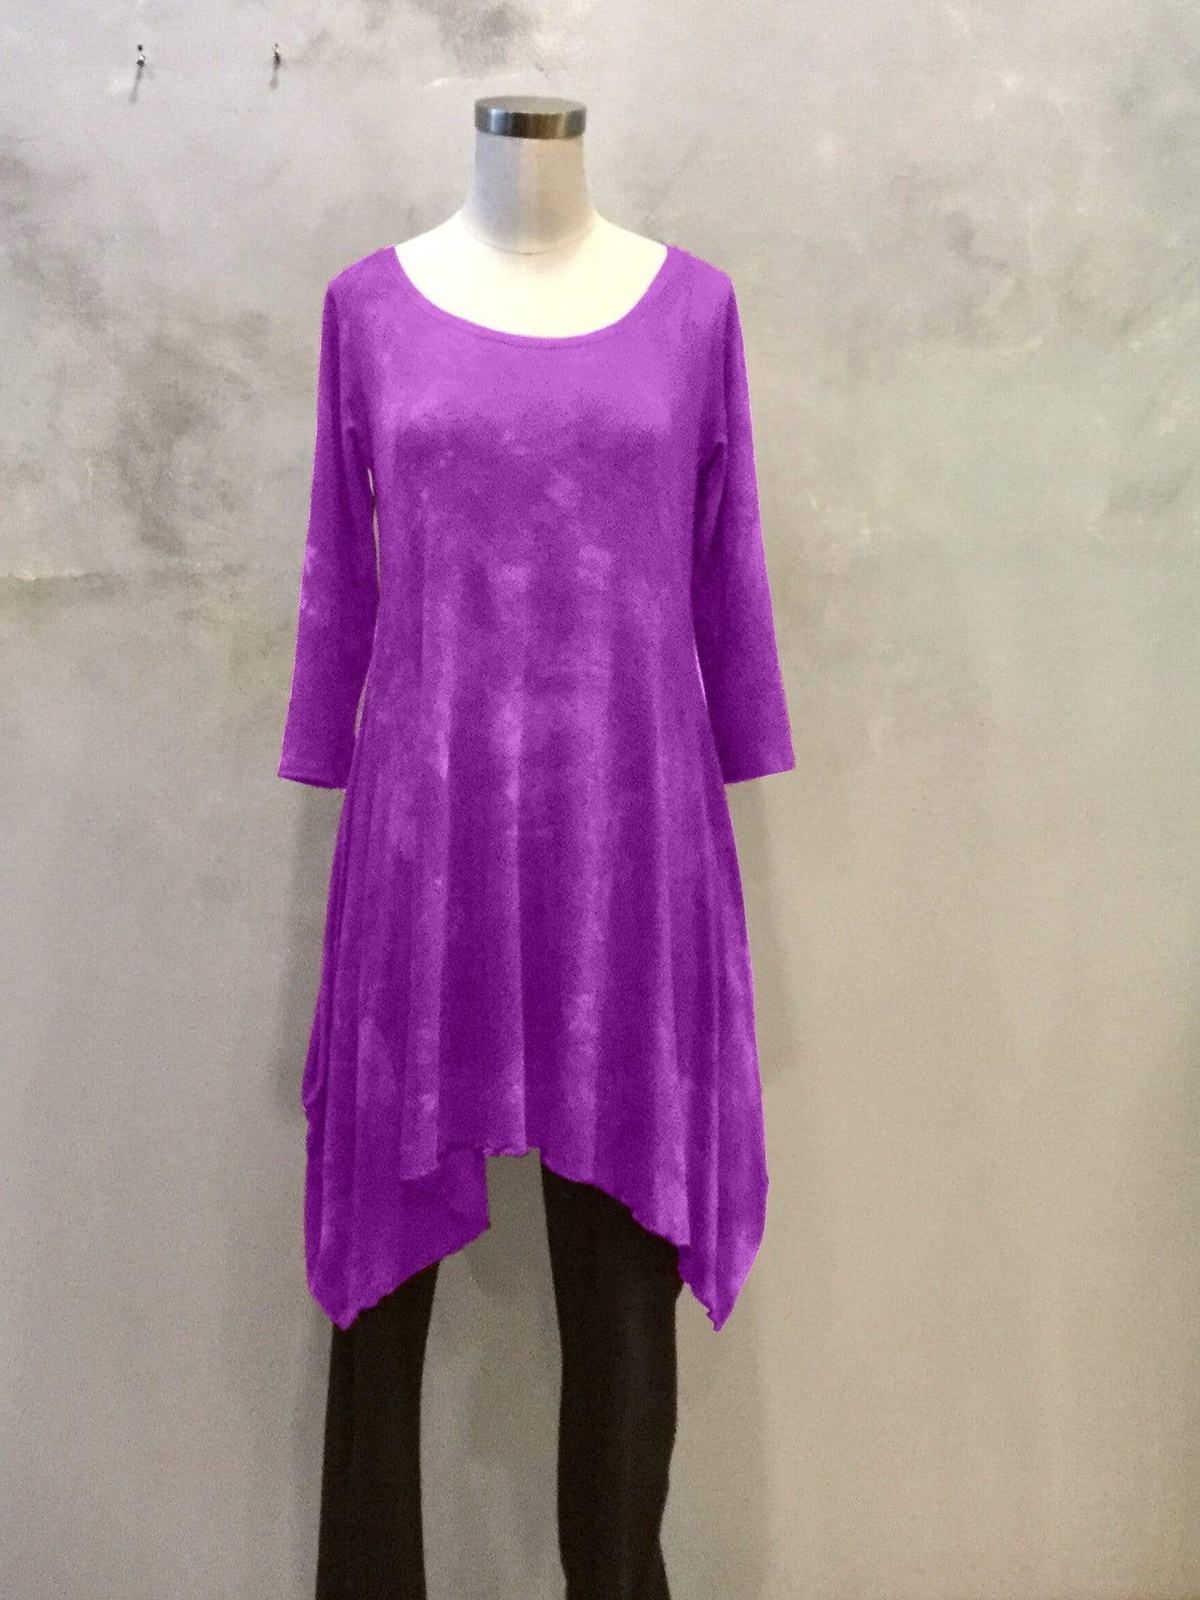 Steel Pony Small / Violet Randy Tunic Dress on the Rack